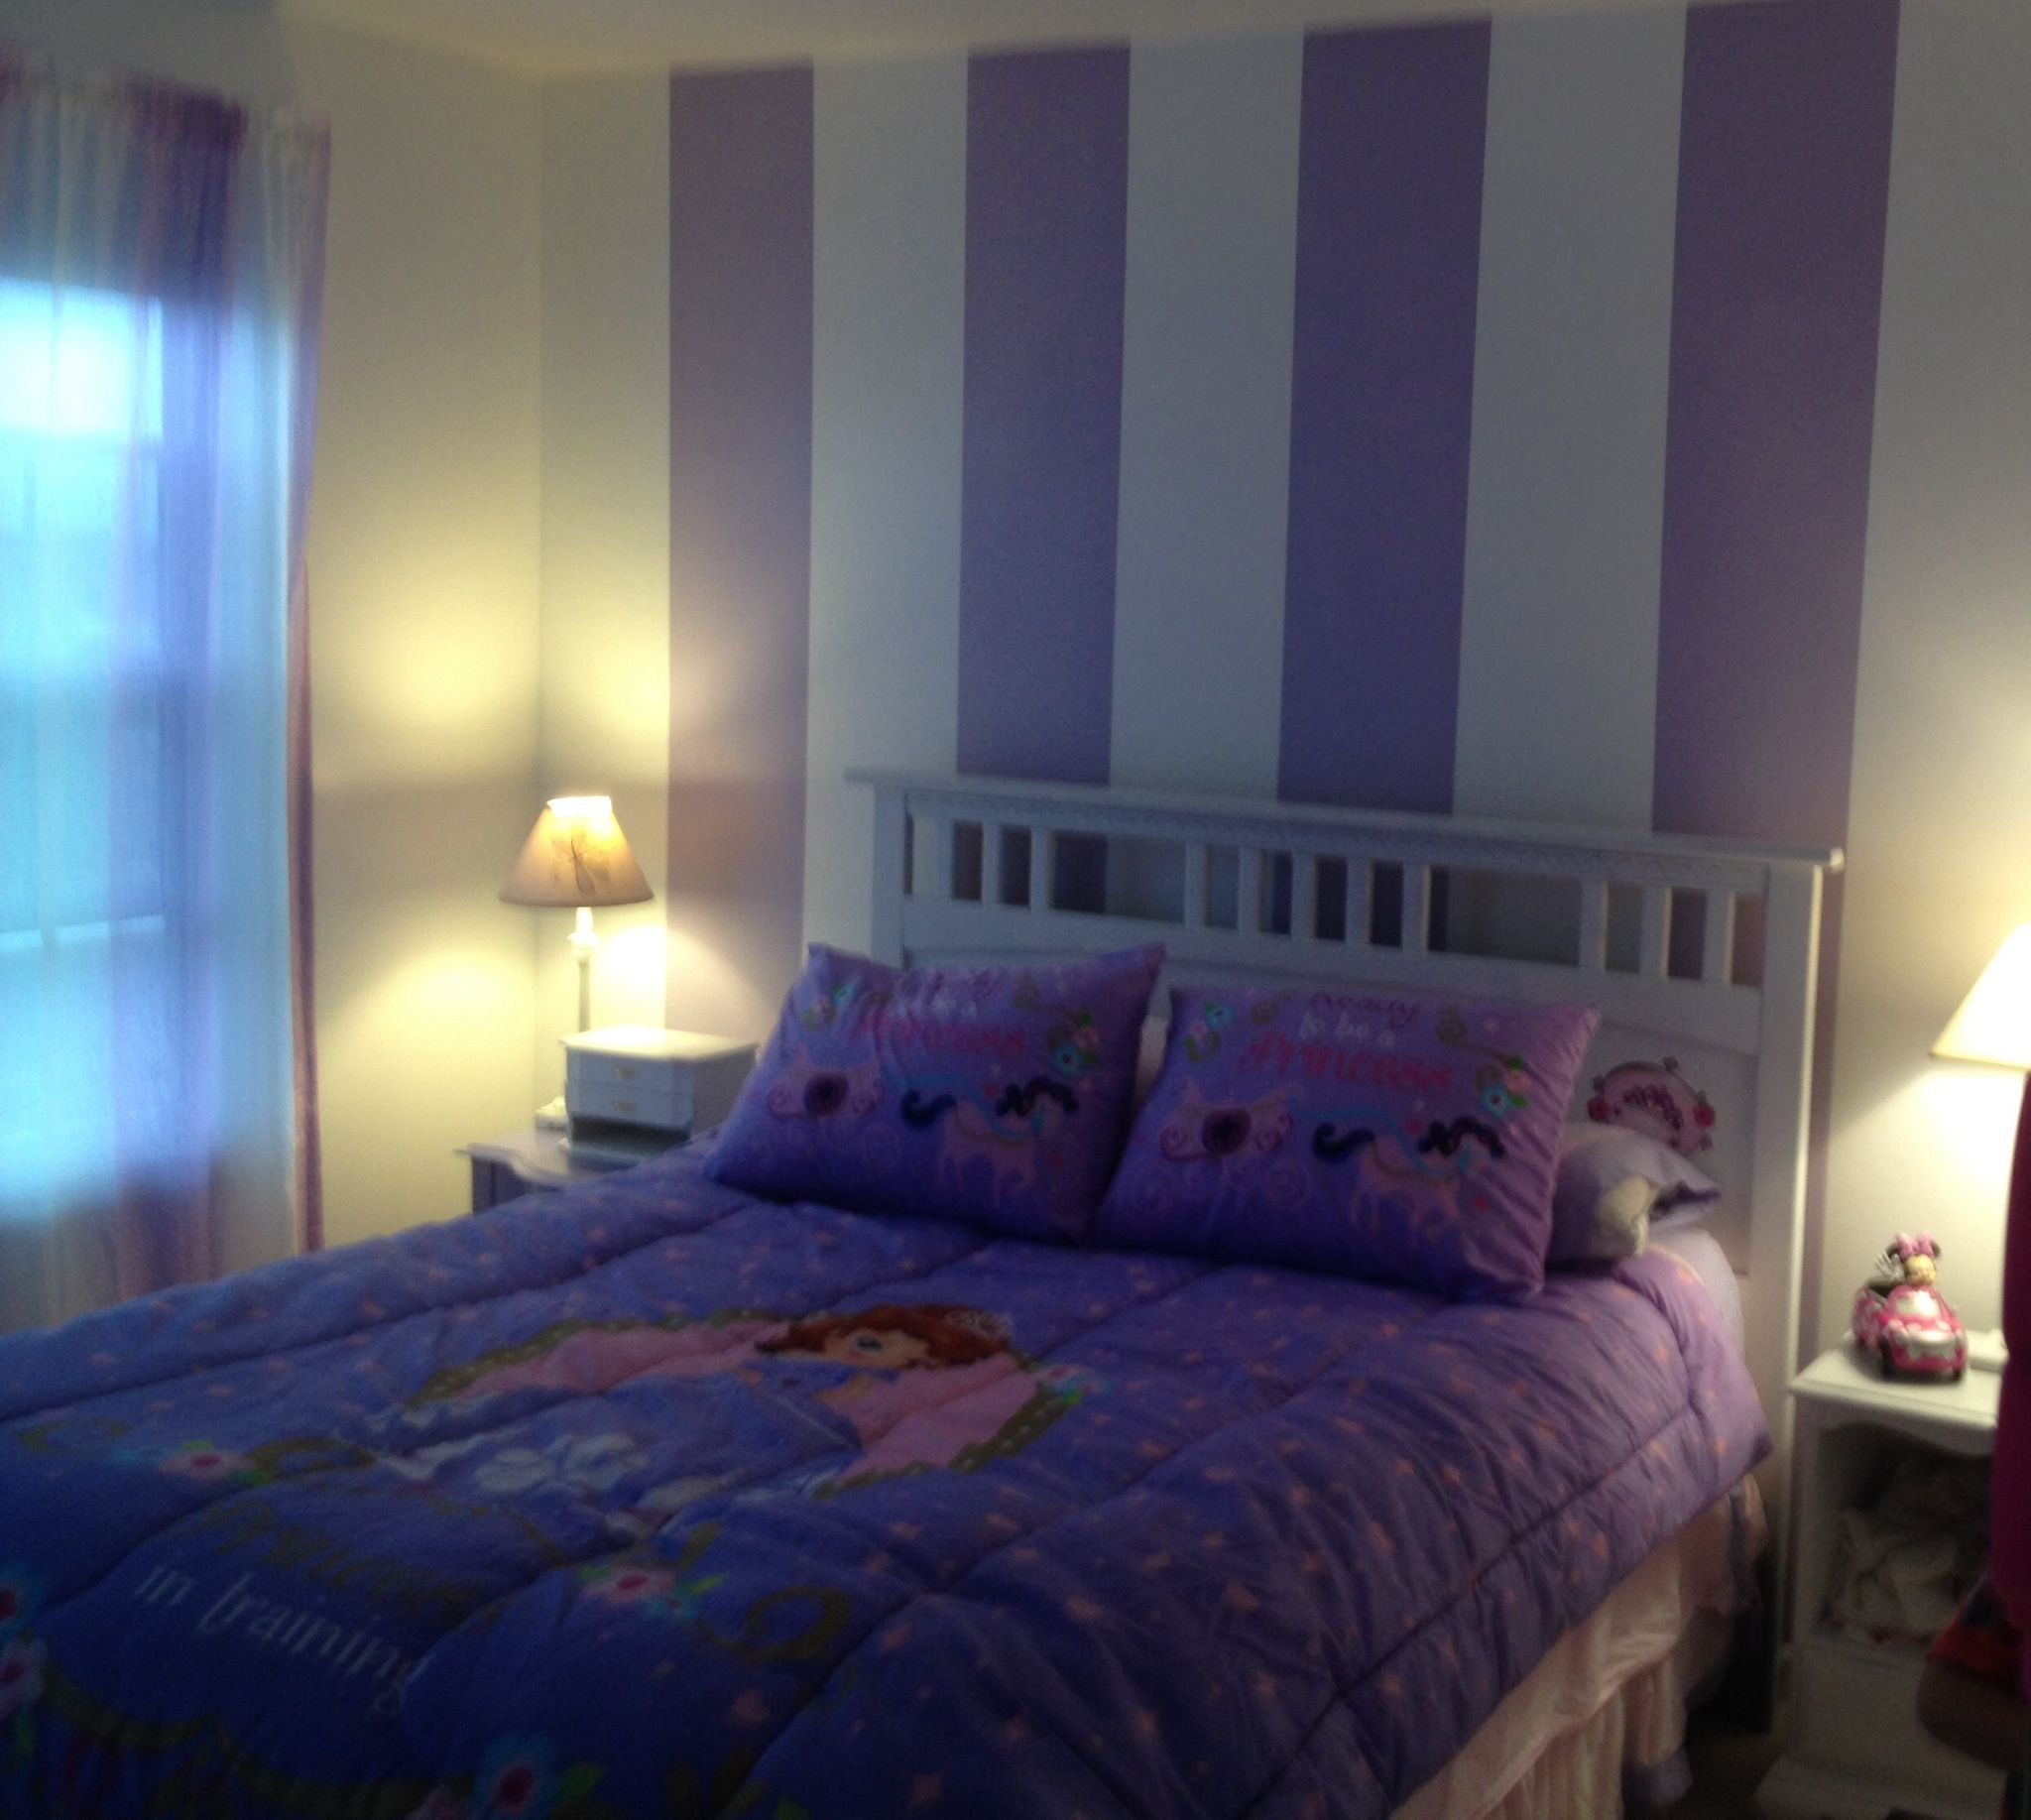 Sofia The First Bedroom Decor
 Sofia the first bedroom